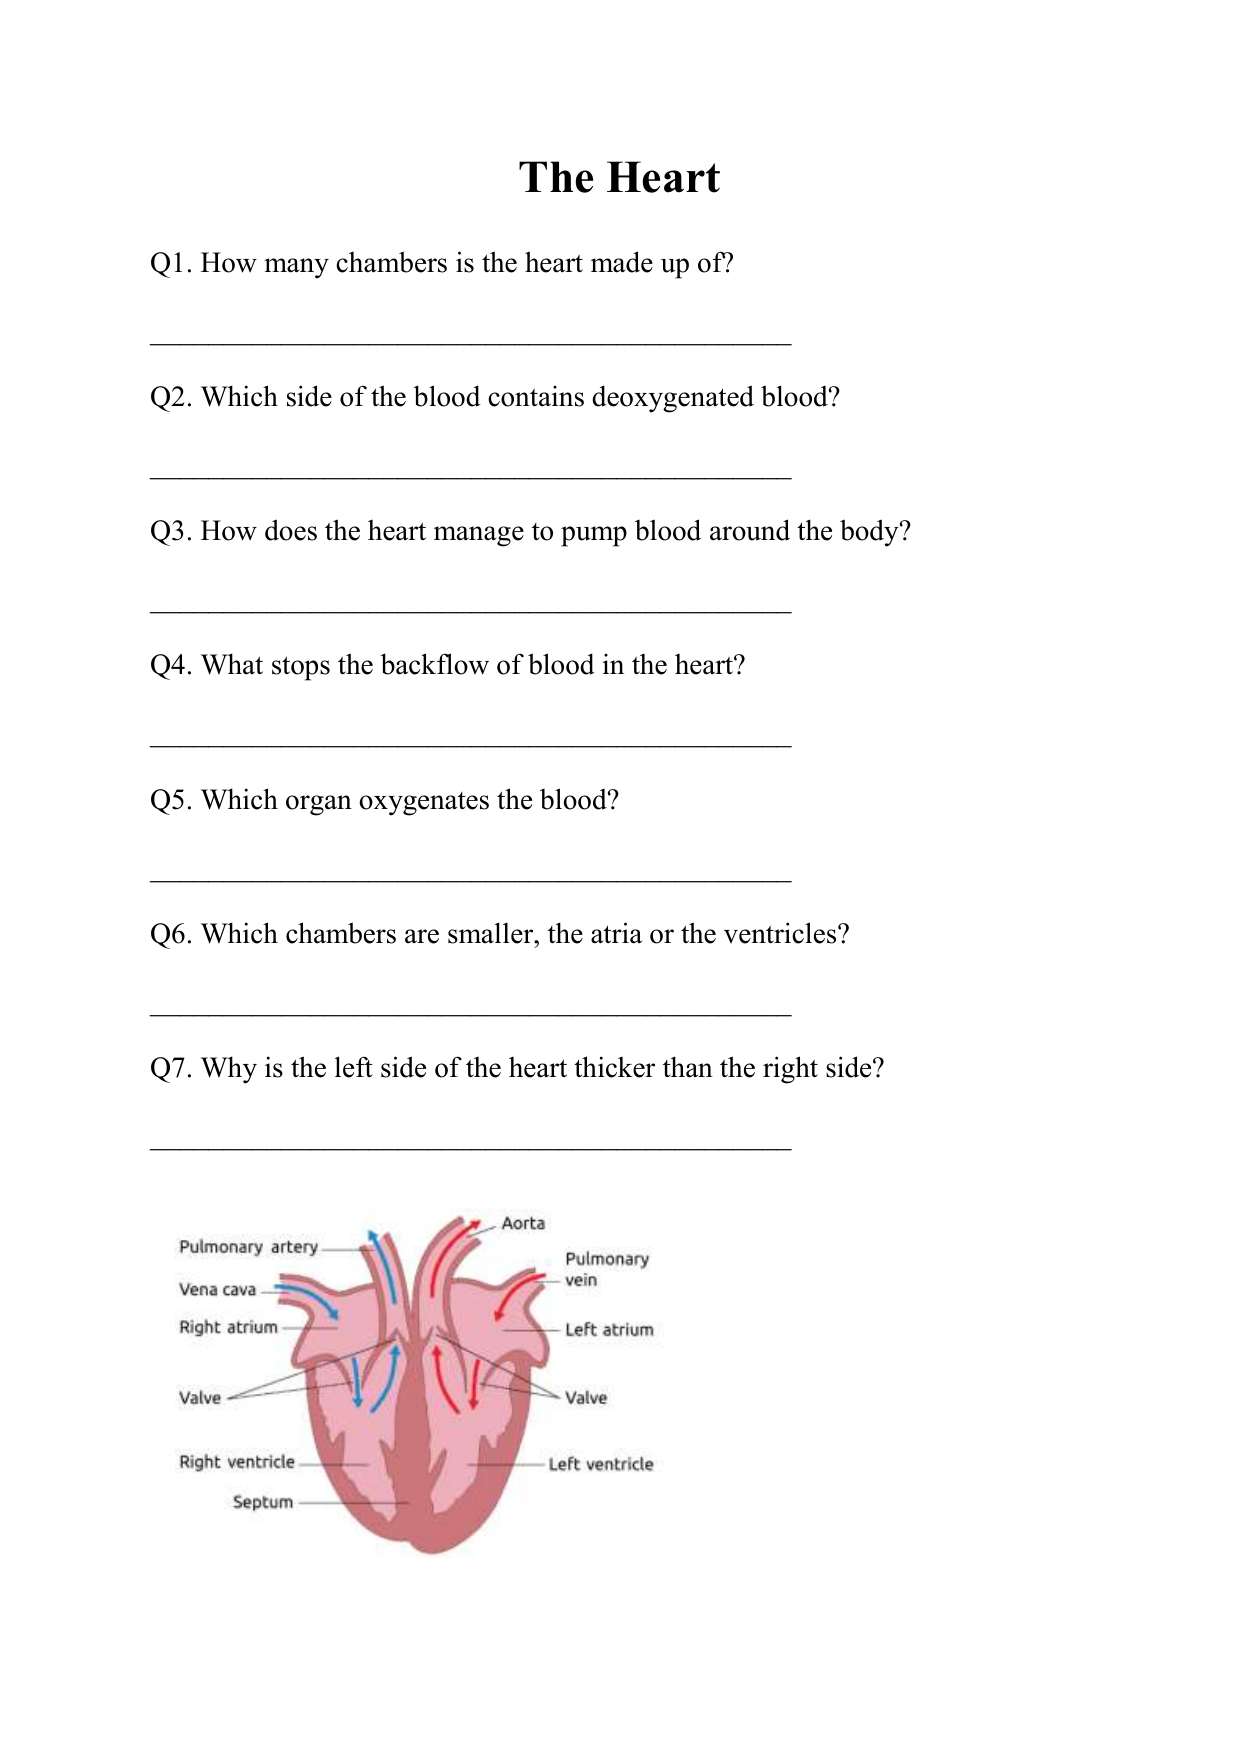 critical thinking questions on the cardiovascular system